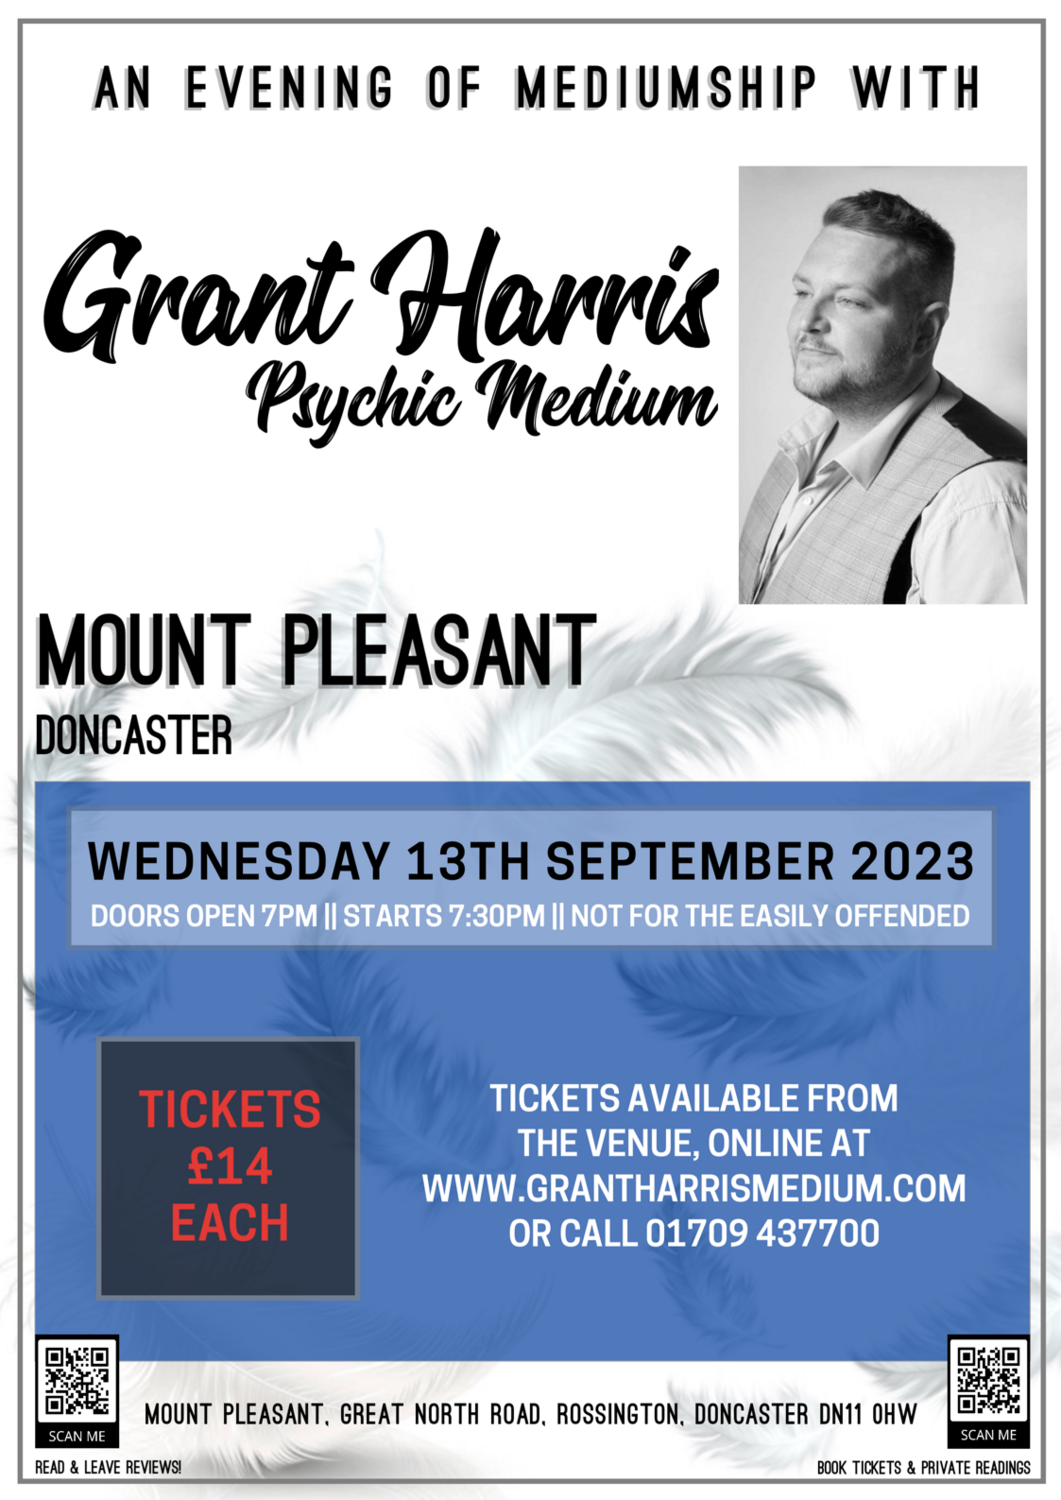 Mount Pleasant Hotel, Doncaster, Wednesday 13th September 2023